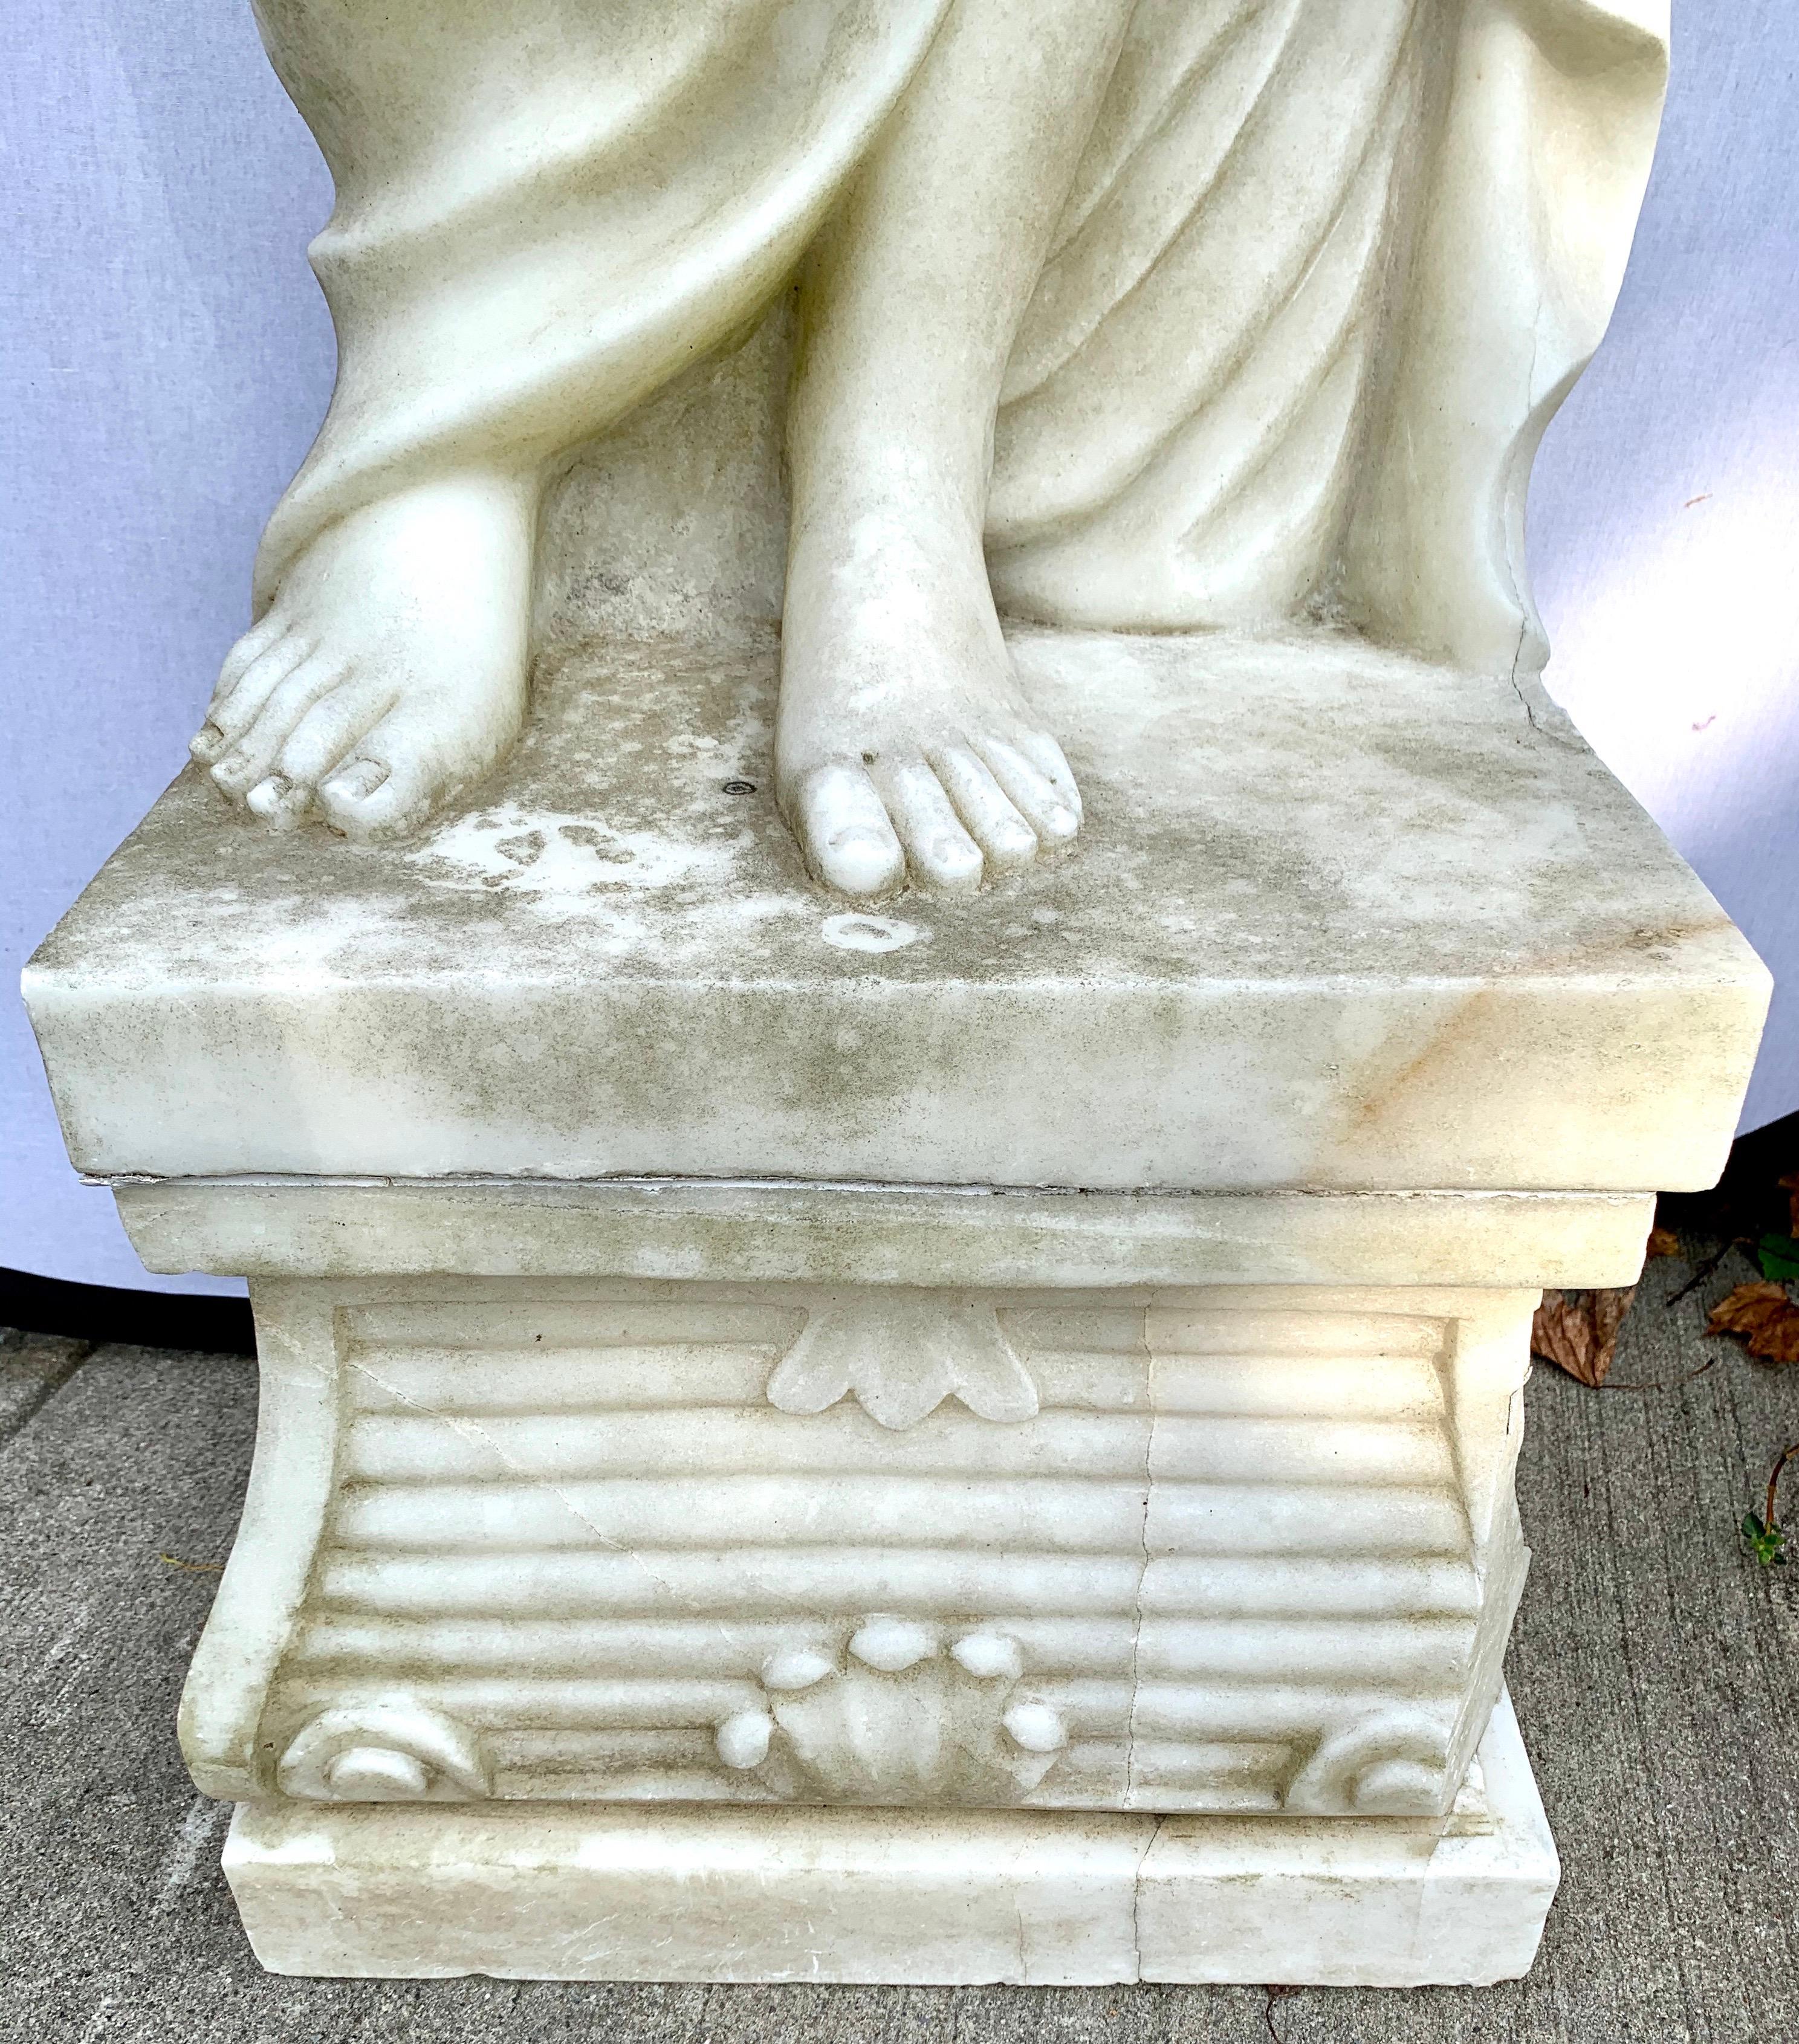 Stunning architectural wonder, this neoclassical Greek goddess life-size sculpture is guaranteed to make quite the statement. All dimensions are below. Now, more than ever, home is where the heart is.